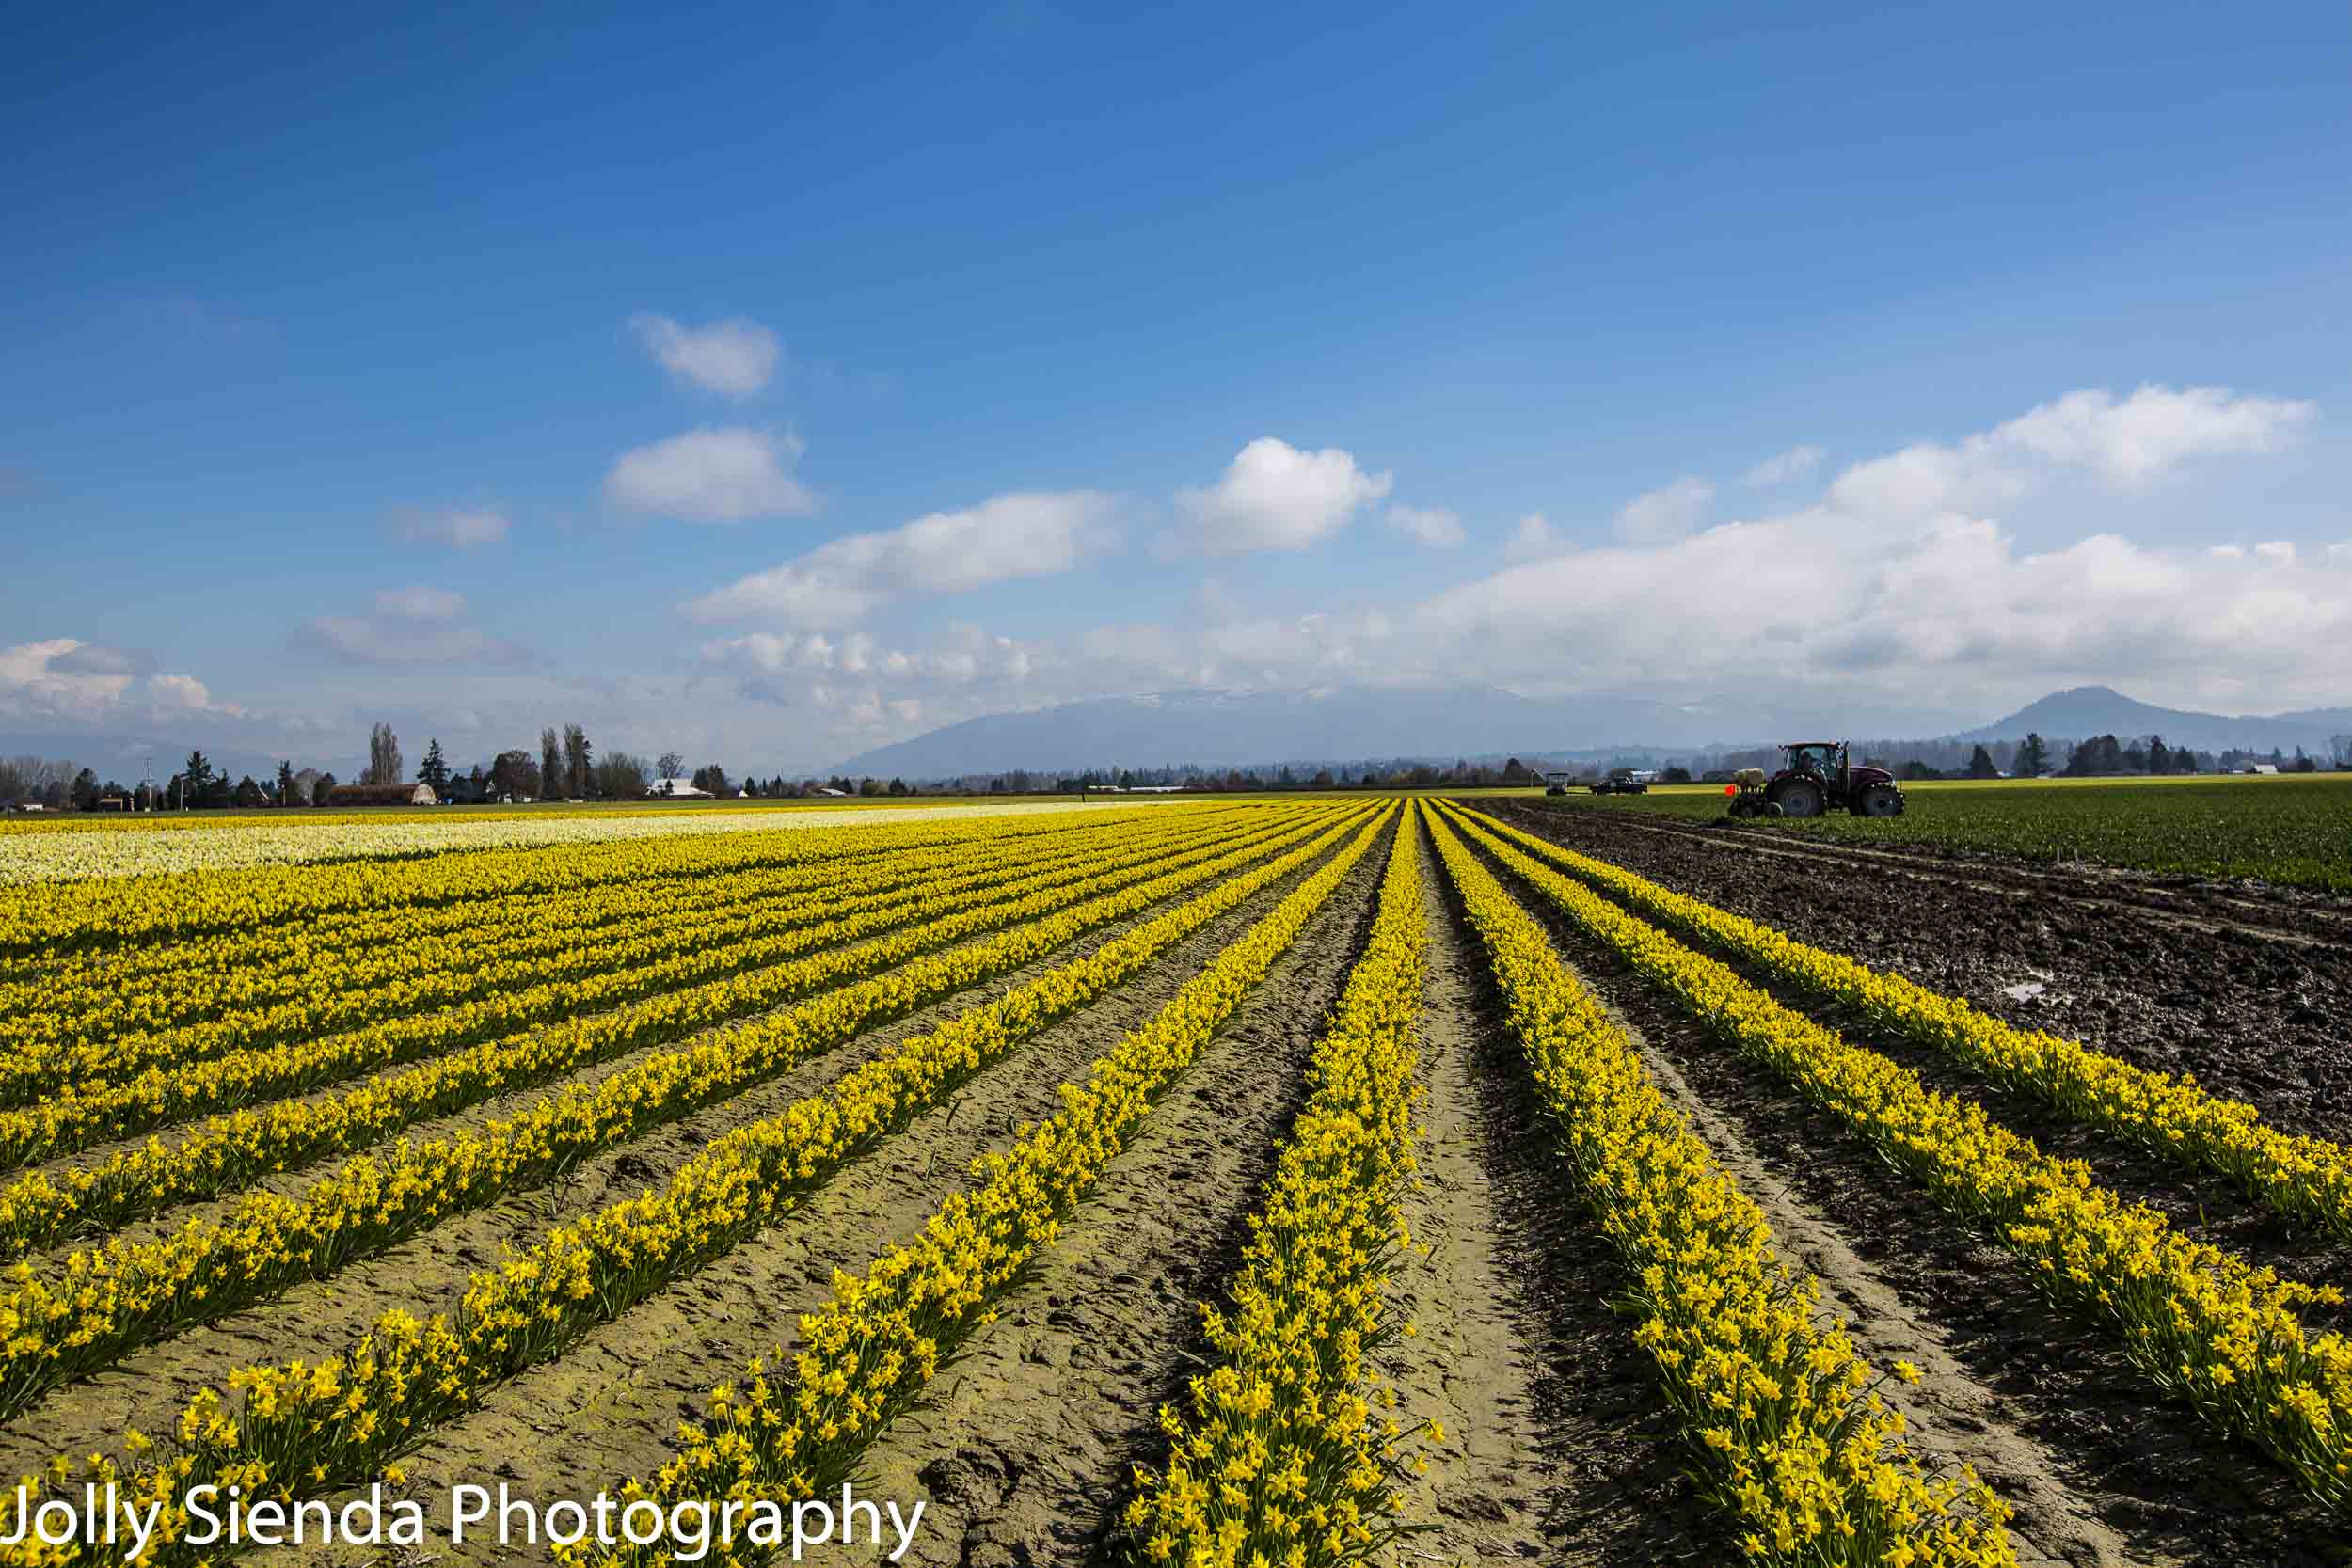 Long rows of daffodils in a field and tractors